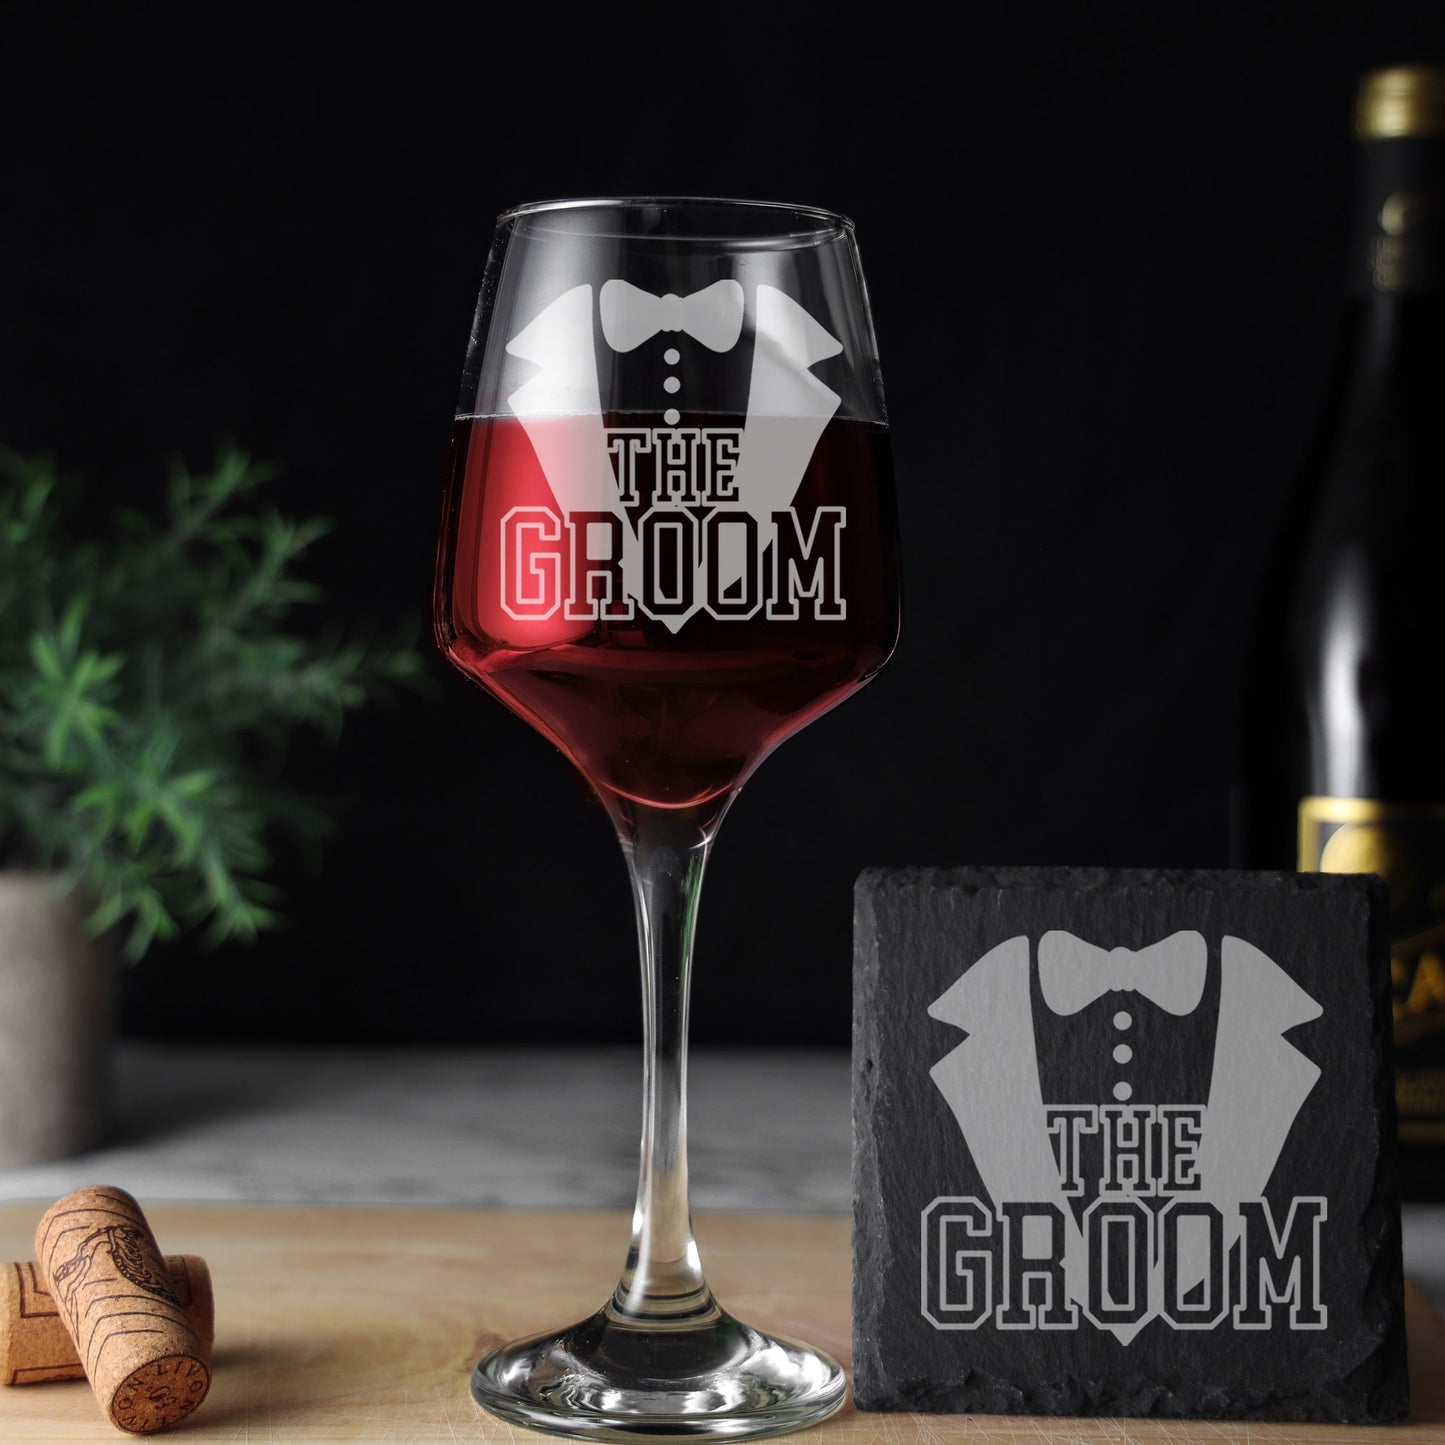 The Groom Engraved Wine Glass and/or Coaster Set  - Always Looking Good - Glass & Square Coaster Set  